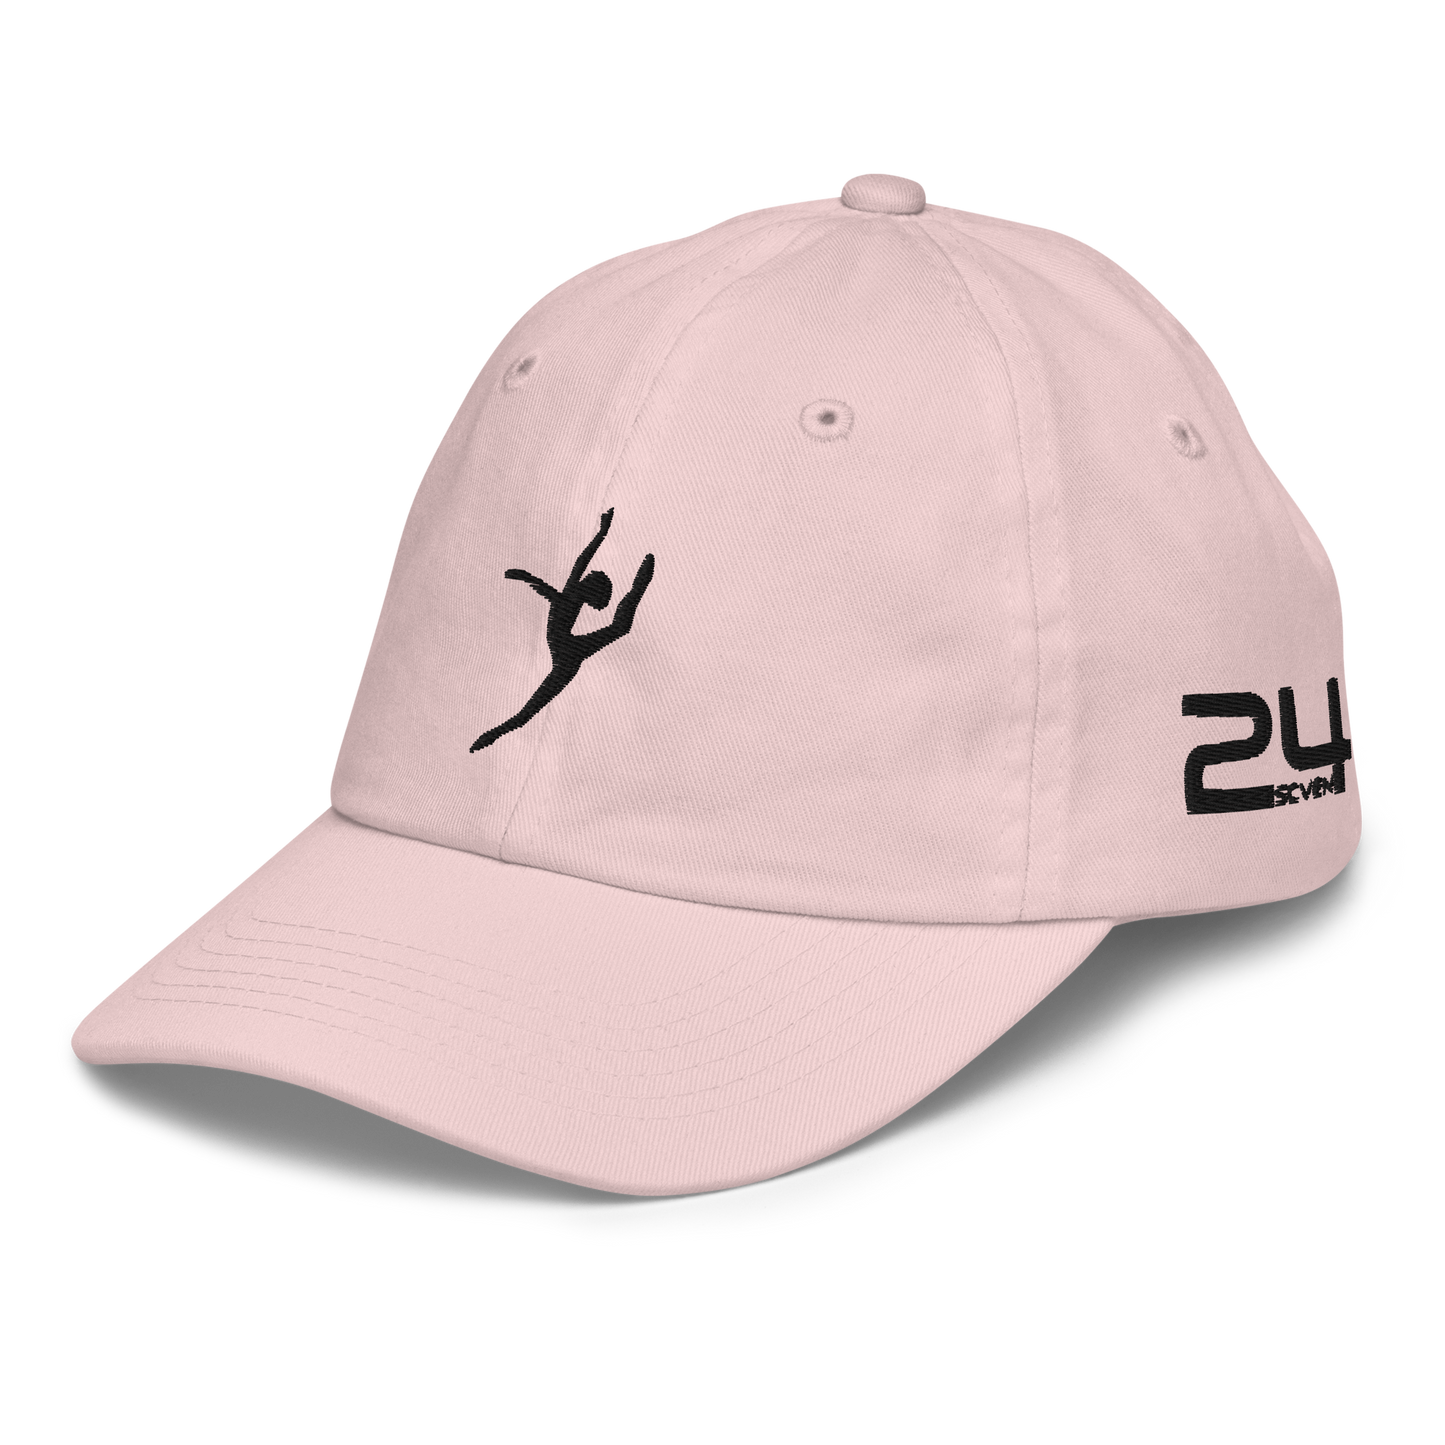 Dance Embroidered Youth Baseball Cap